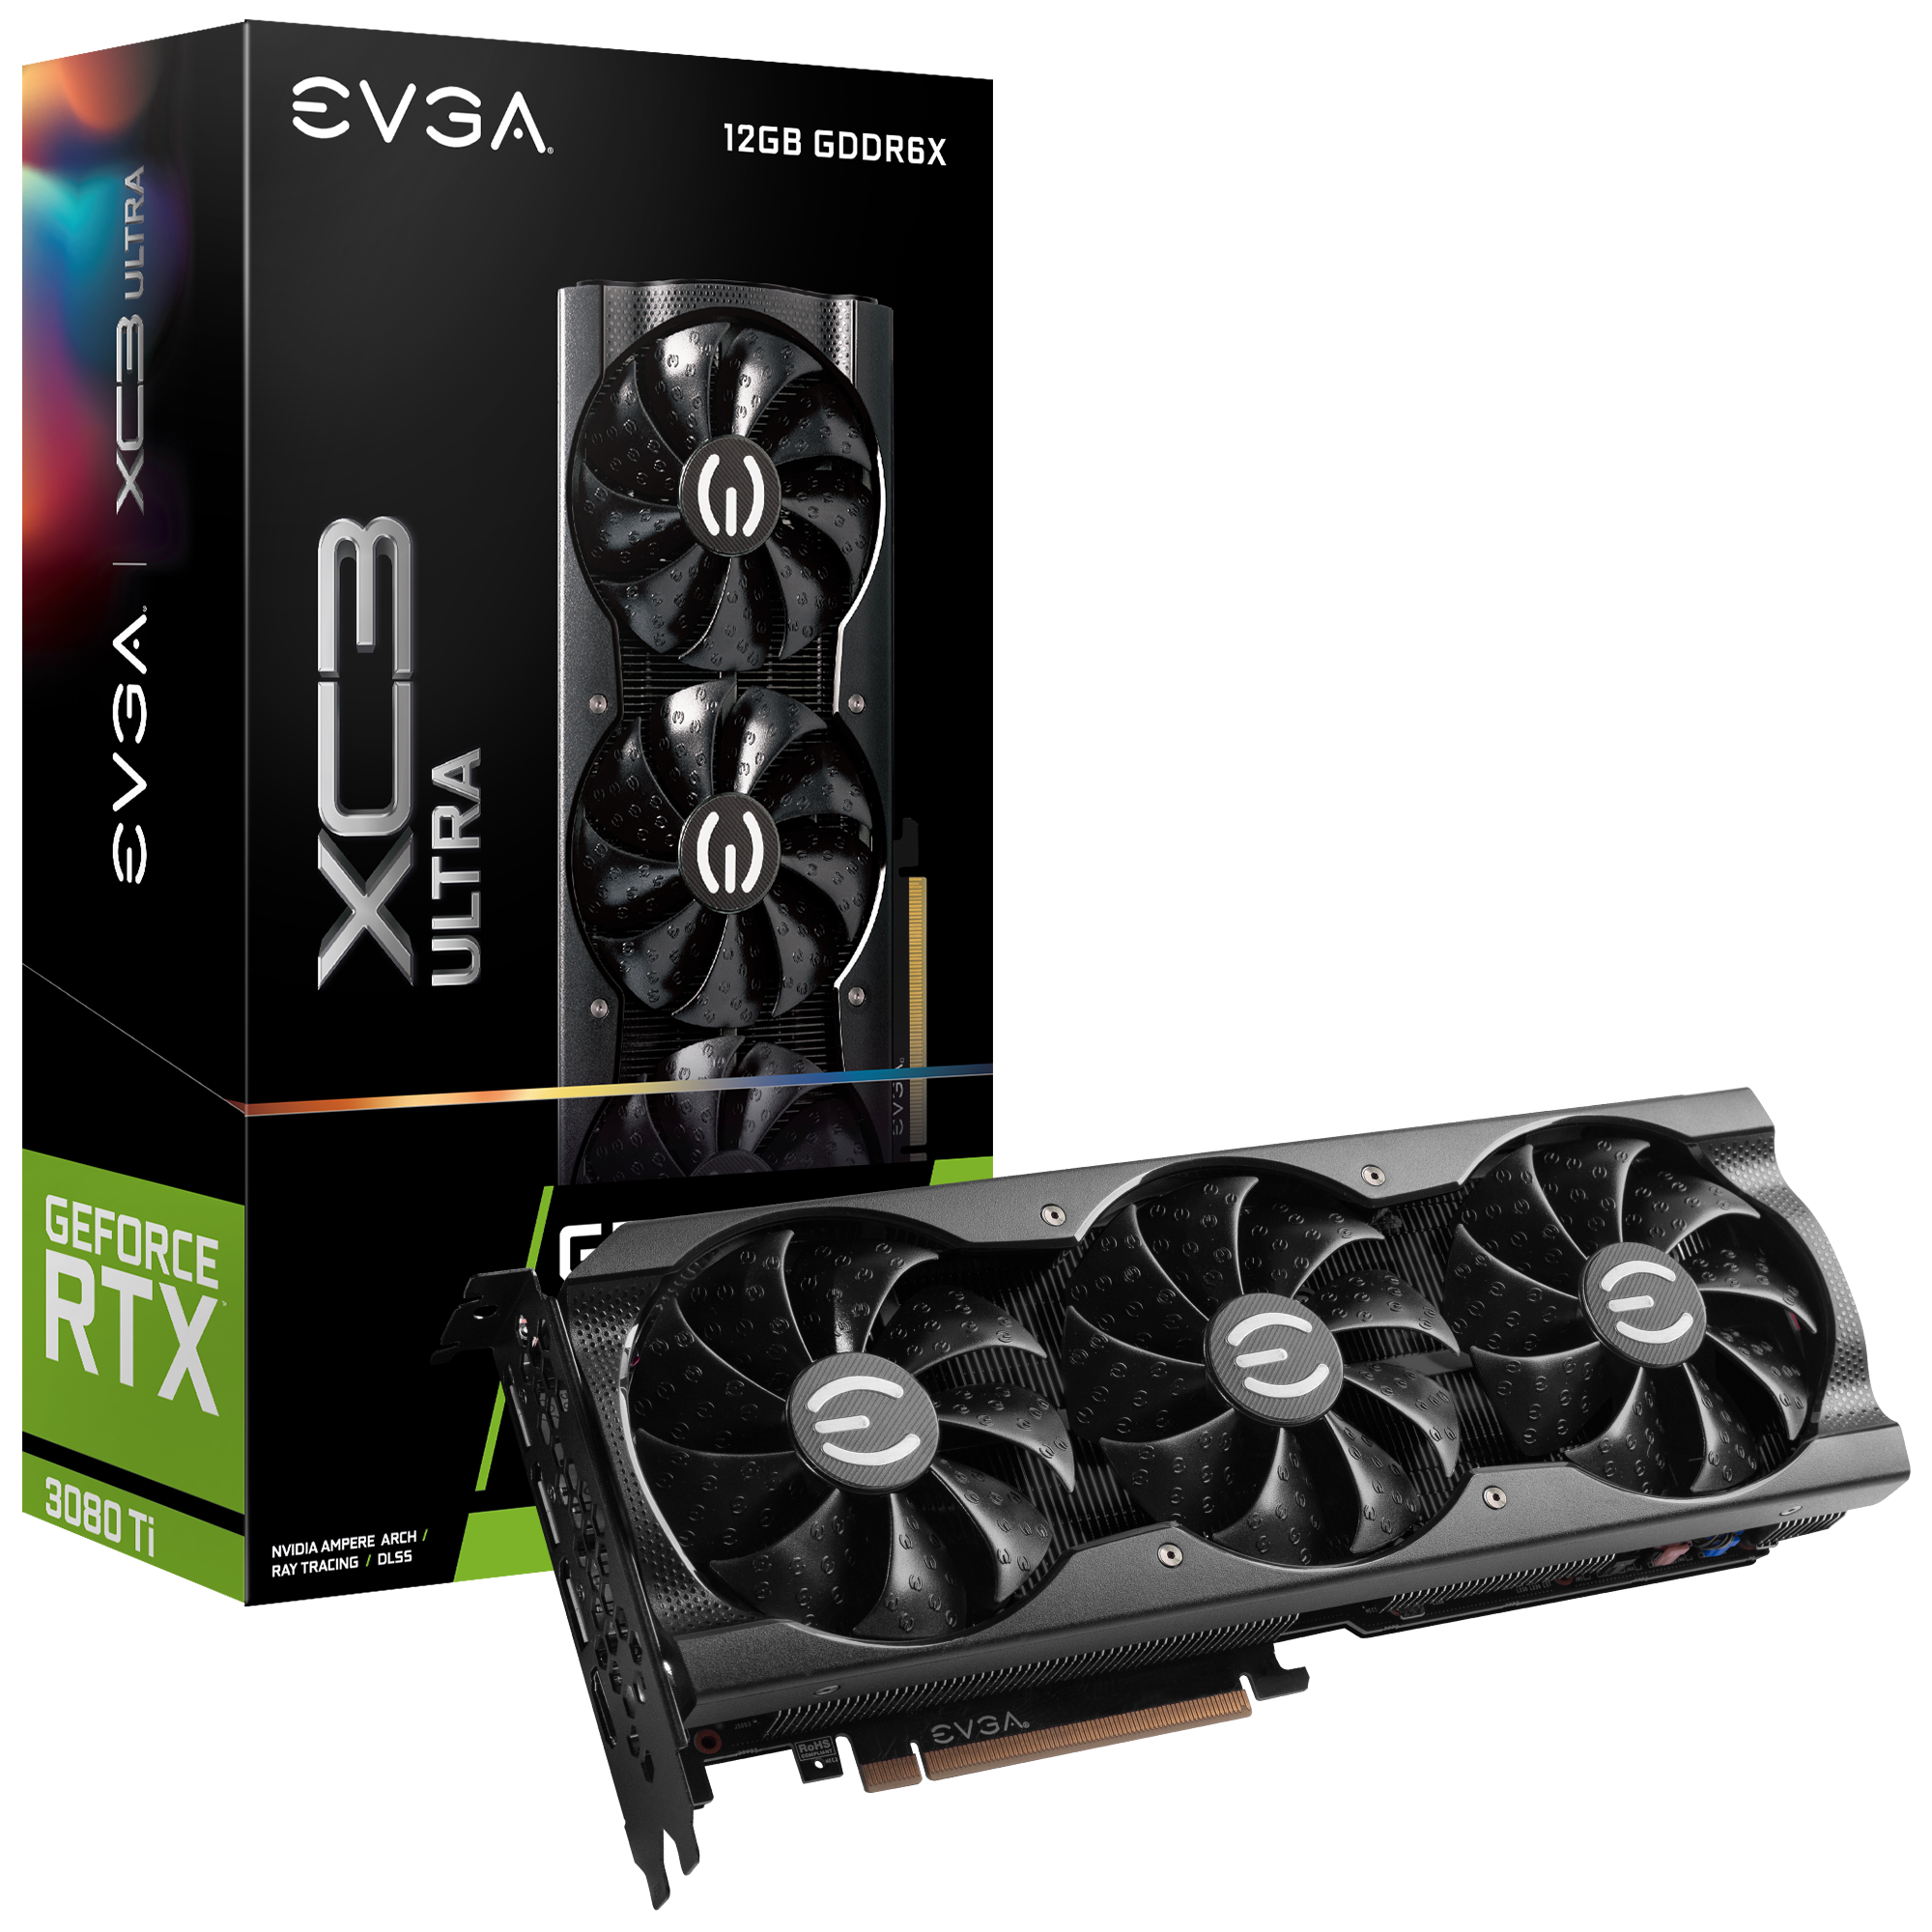 - Products - EVGA GeForce RTX 3080 Ti XC3 ULTRA GAMING, 12G-P5-3955-KR, GDDR6X, iCX3 Cooling, ARGB LED, Metal Backplate 12G-P5-3955-KR